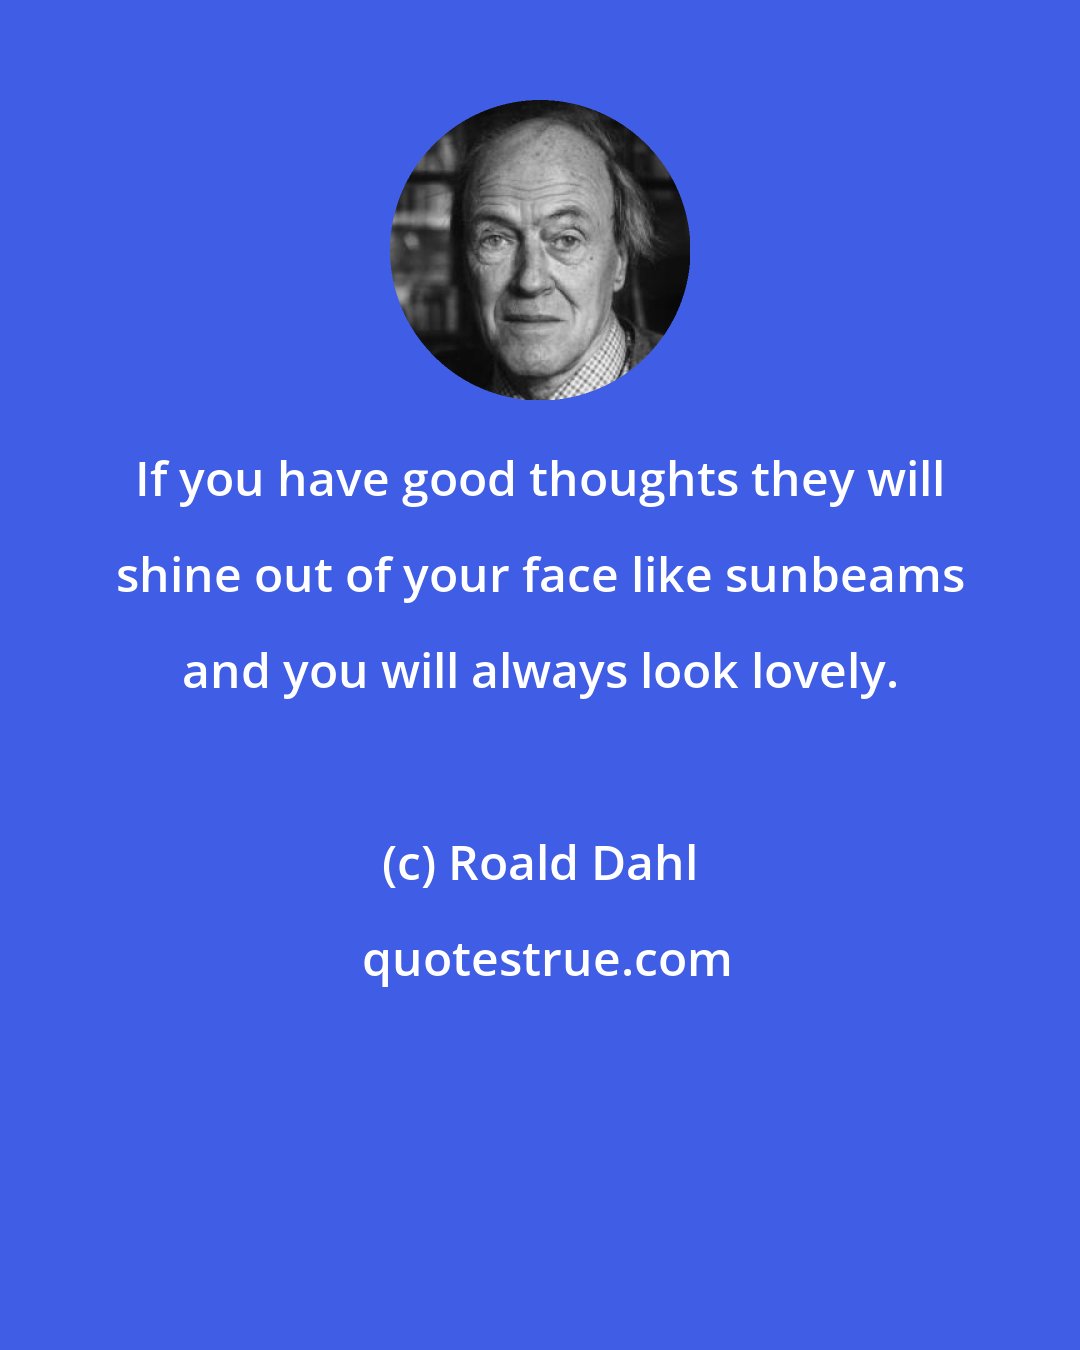 Roald Dahl: If you have good thoughts they will shine out of your face like sunbeams and you will always look lovely.